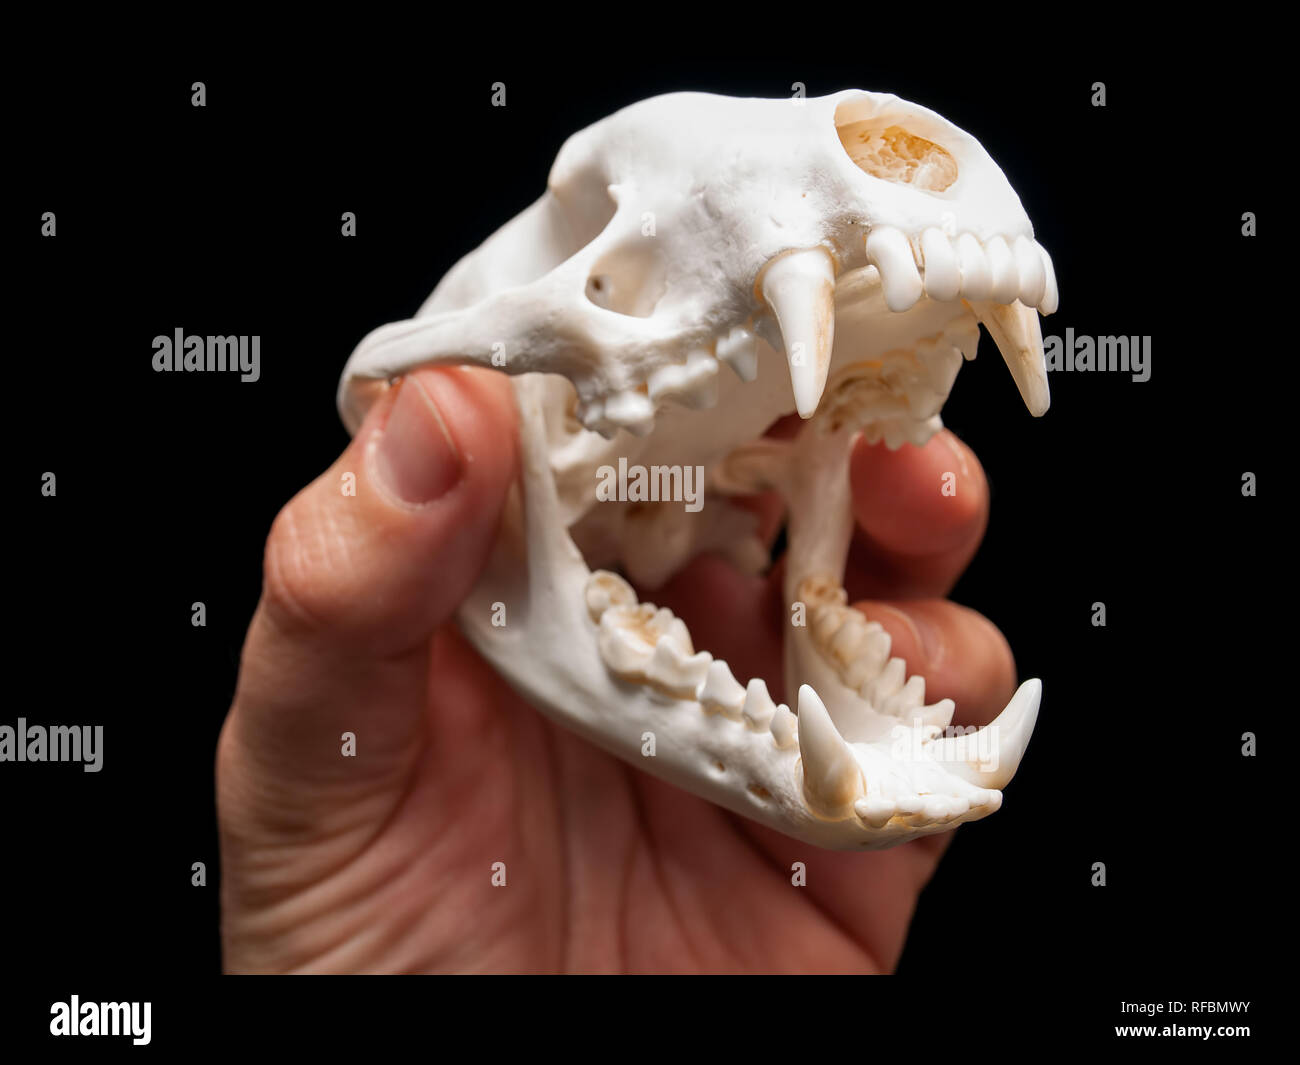 Hand is holding badger skull on a black background. Stock Photo